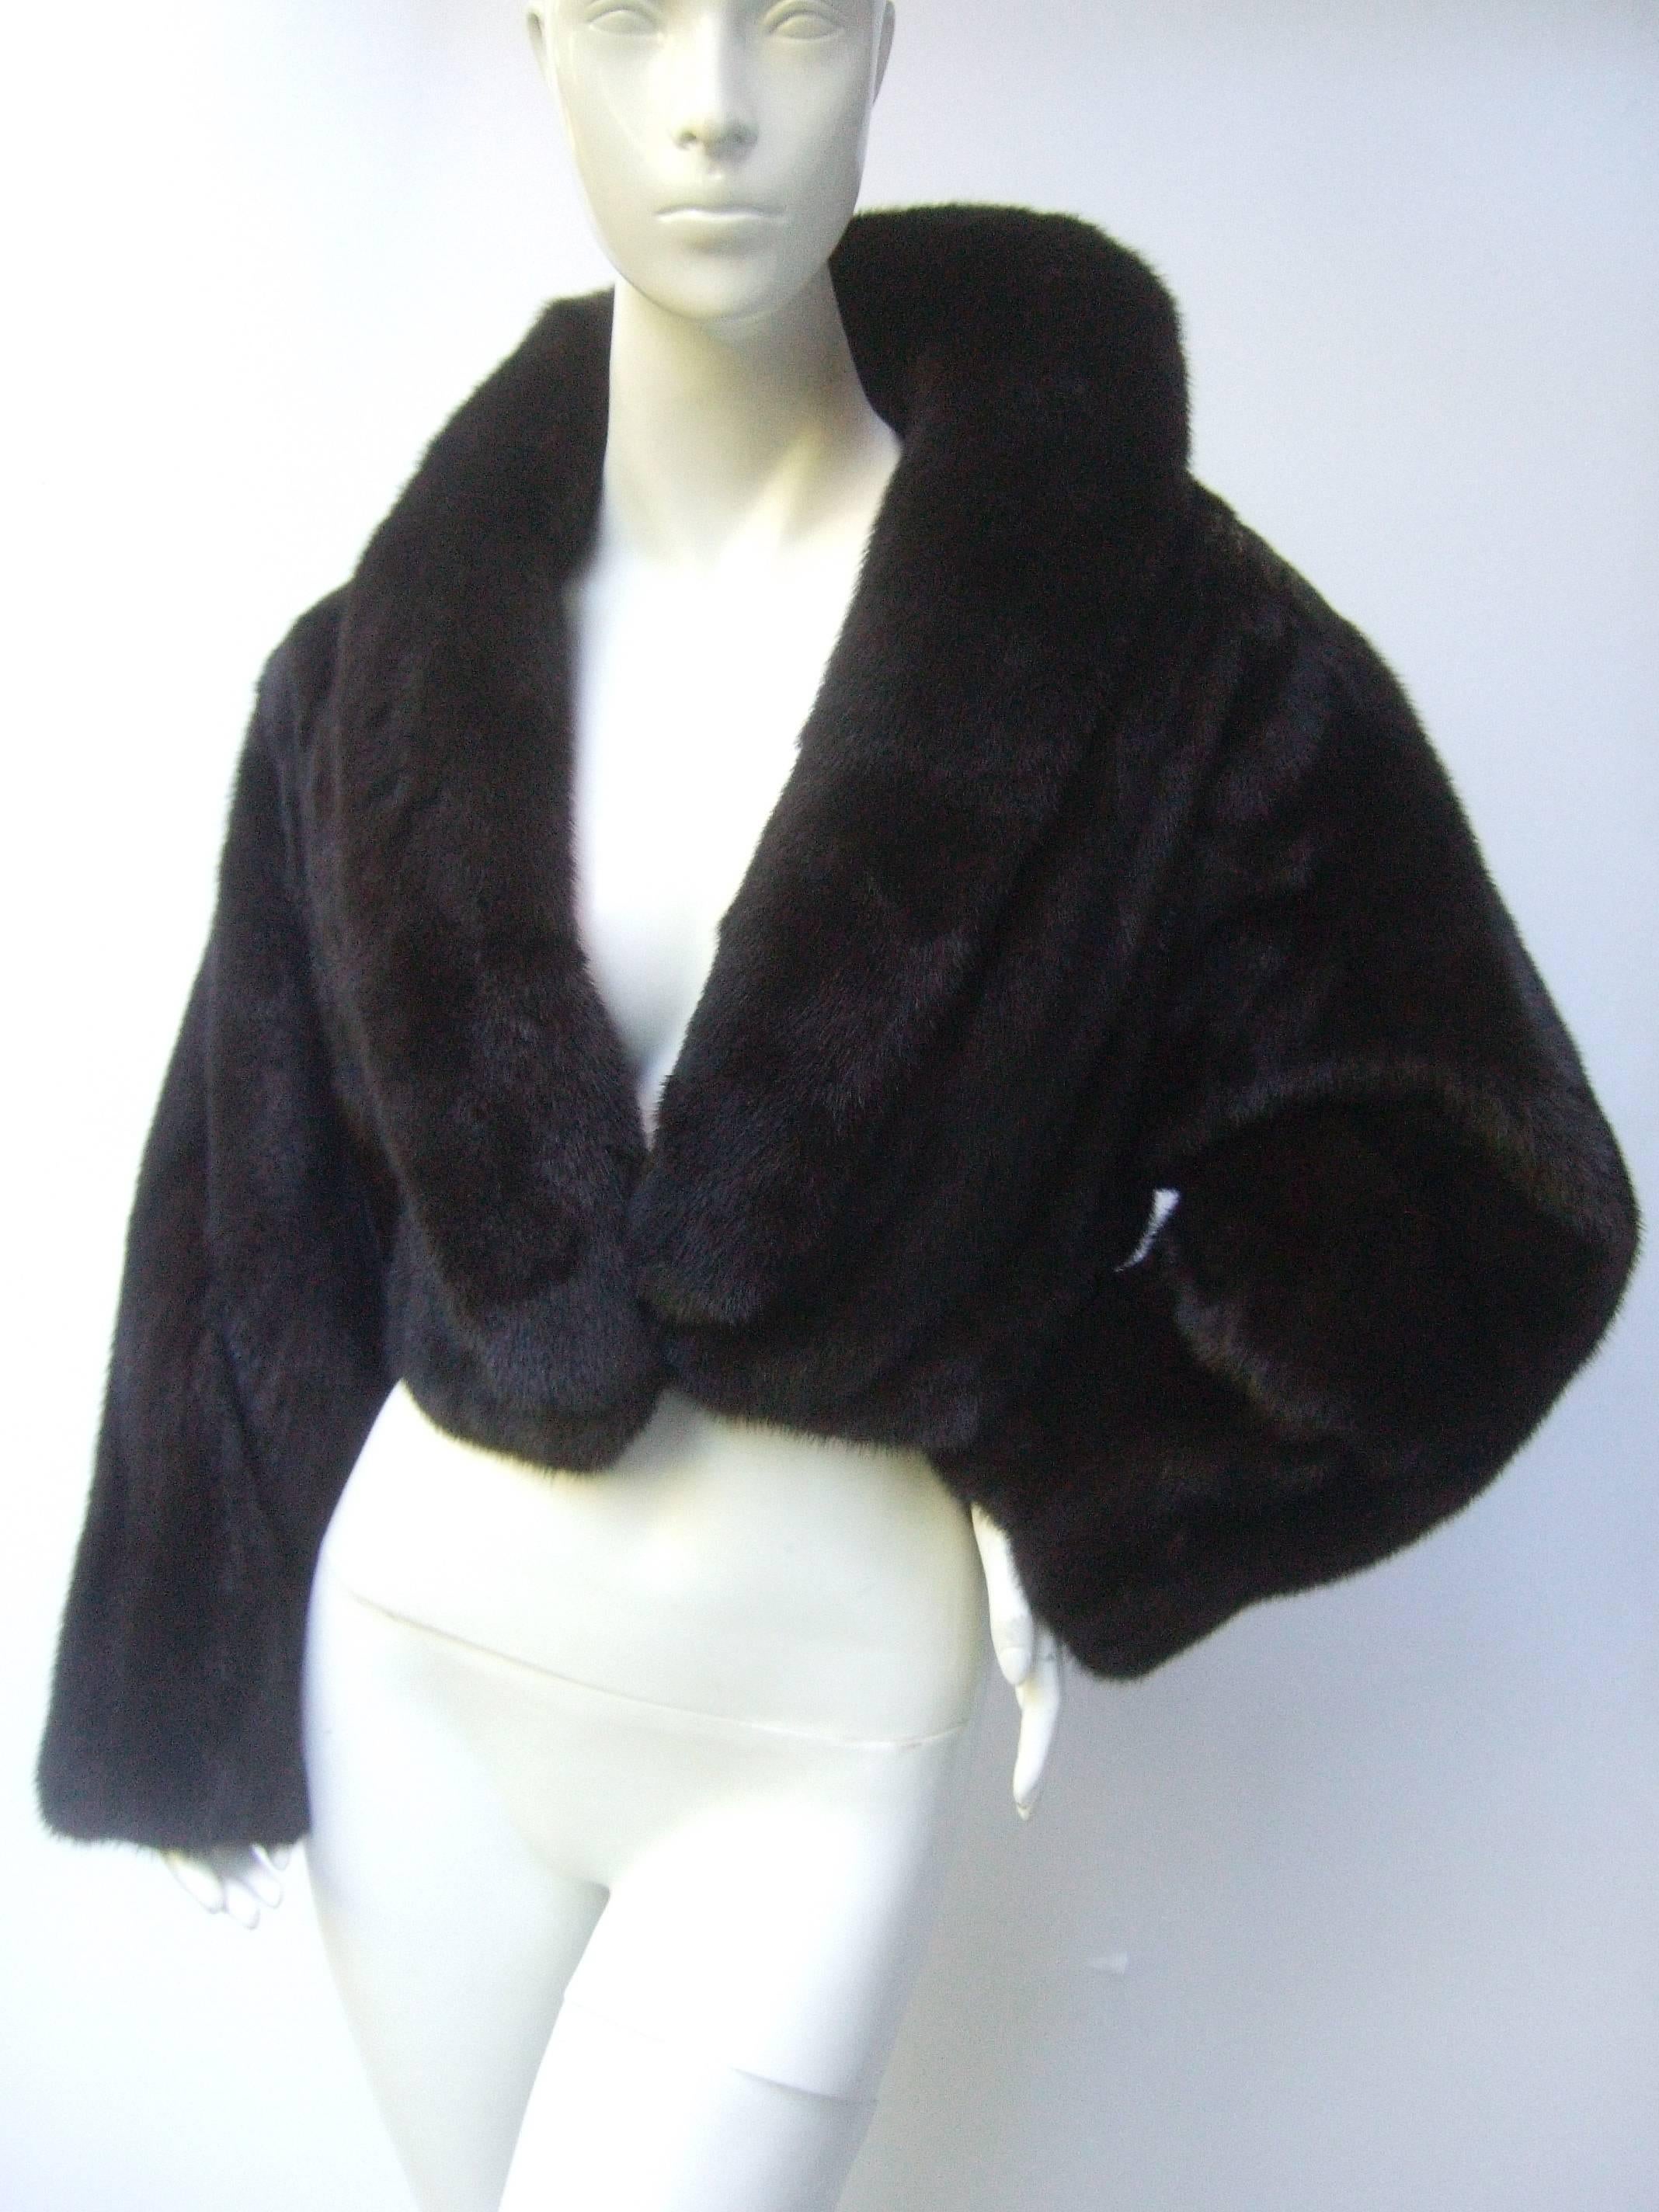 Luxurious mahogany brown mink fur bolero jacket
The plush fur jacket is designed with sumptuous 
dark brown mink fur

The wide mink fur collar can be framed around 
the neck. The wide voluminous sleeves sheath 
the arms in warmth and luxury